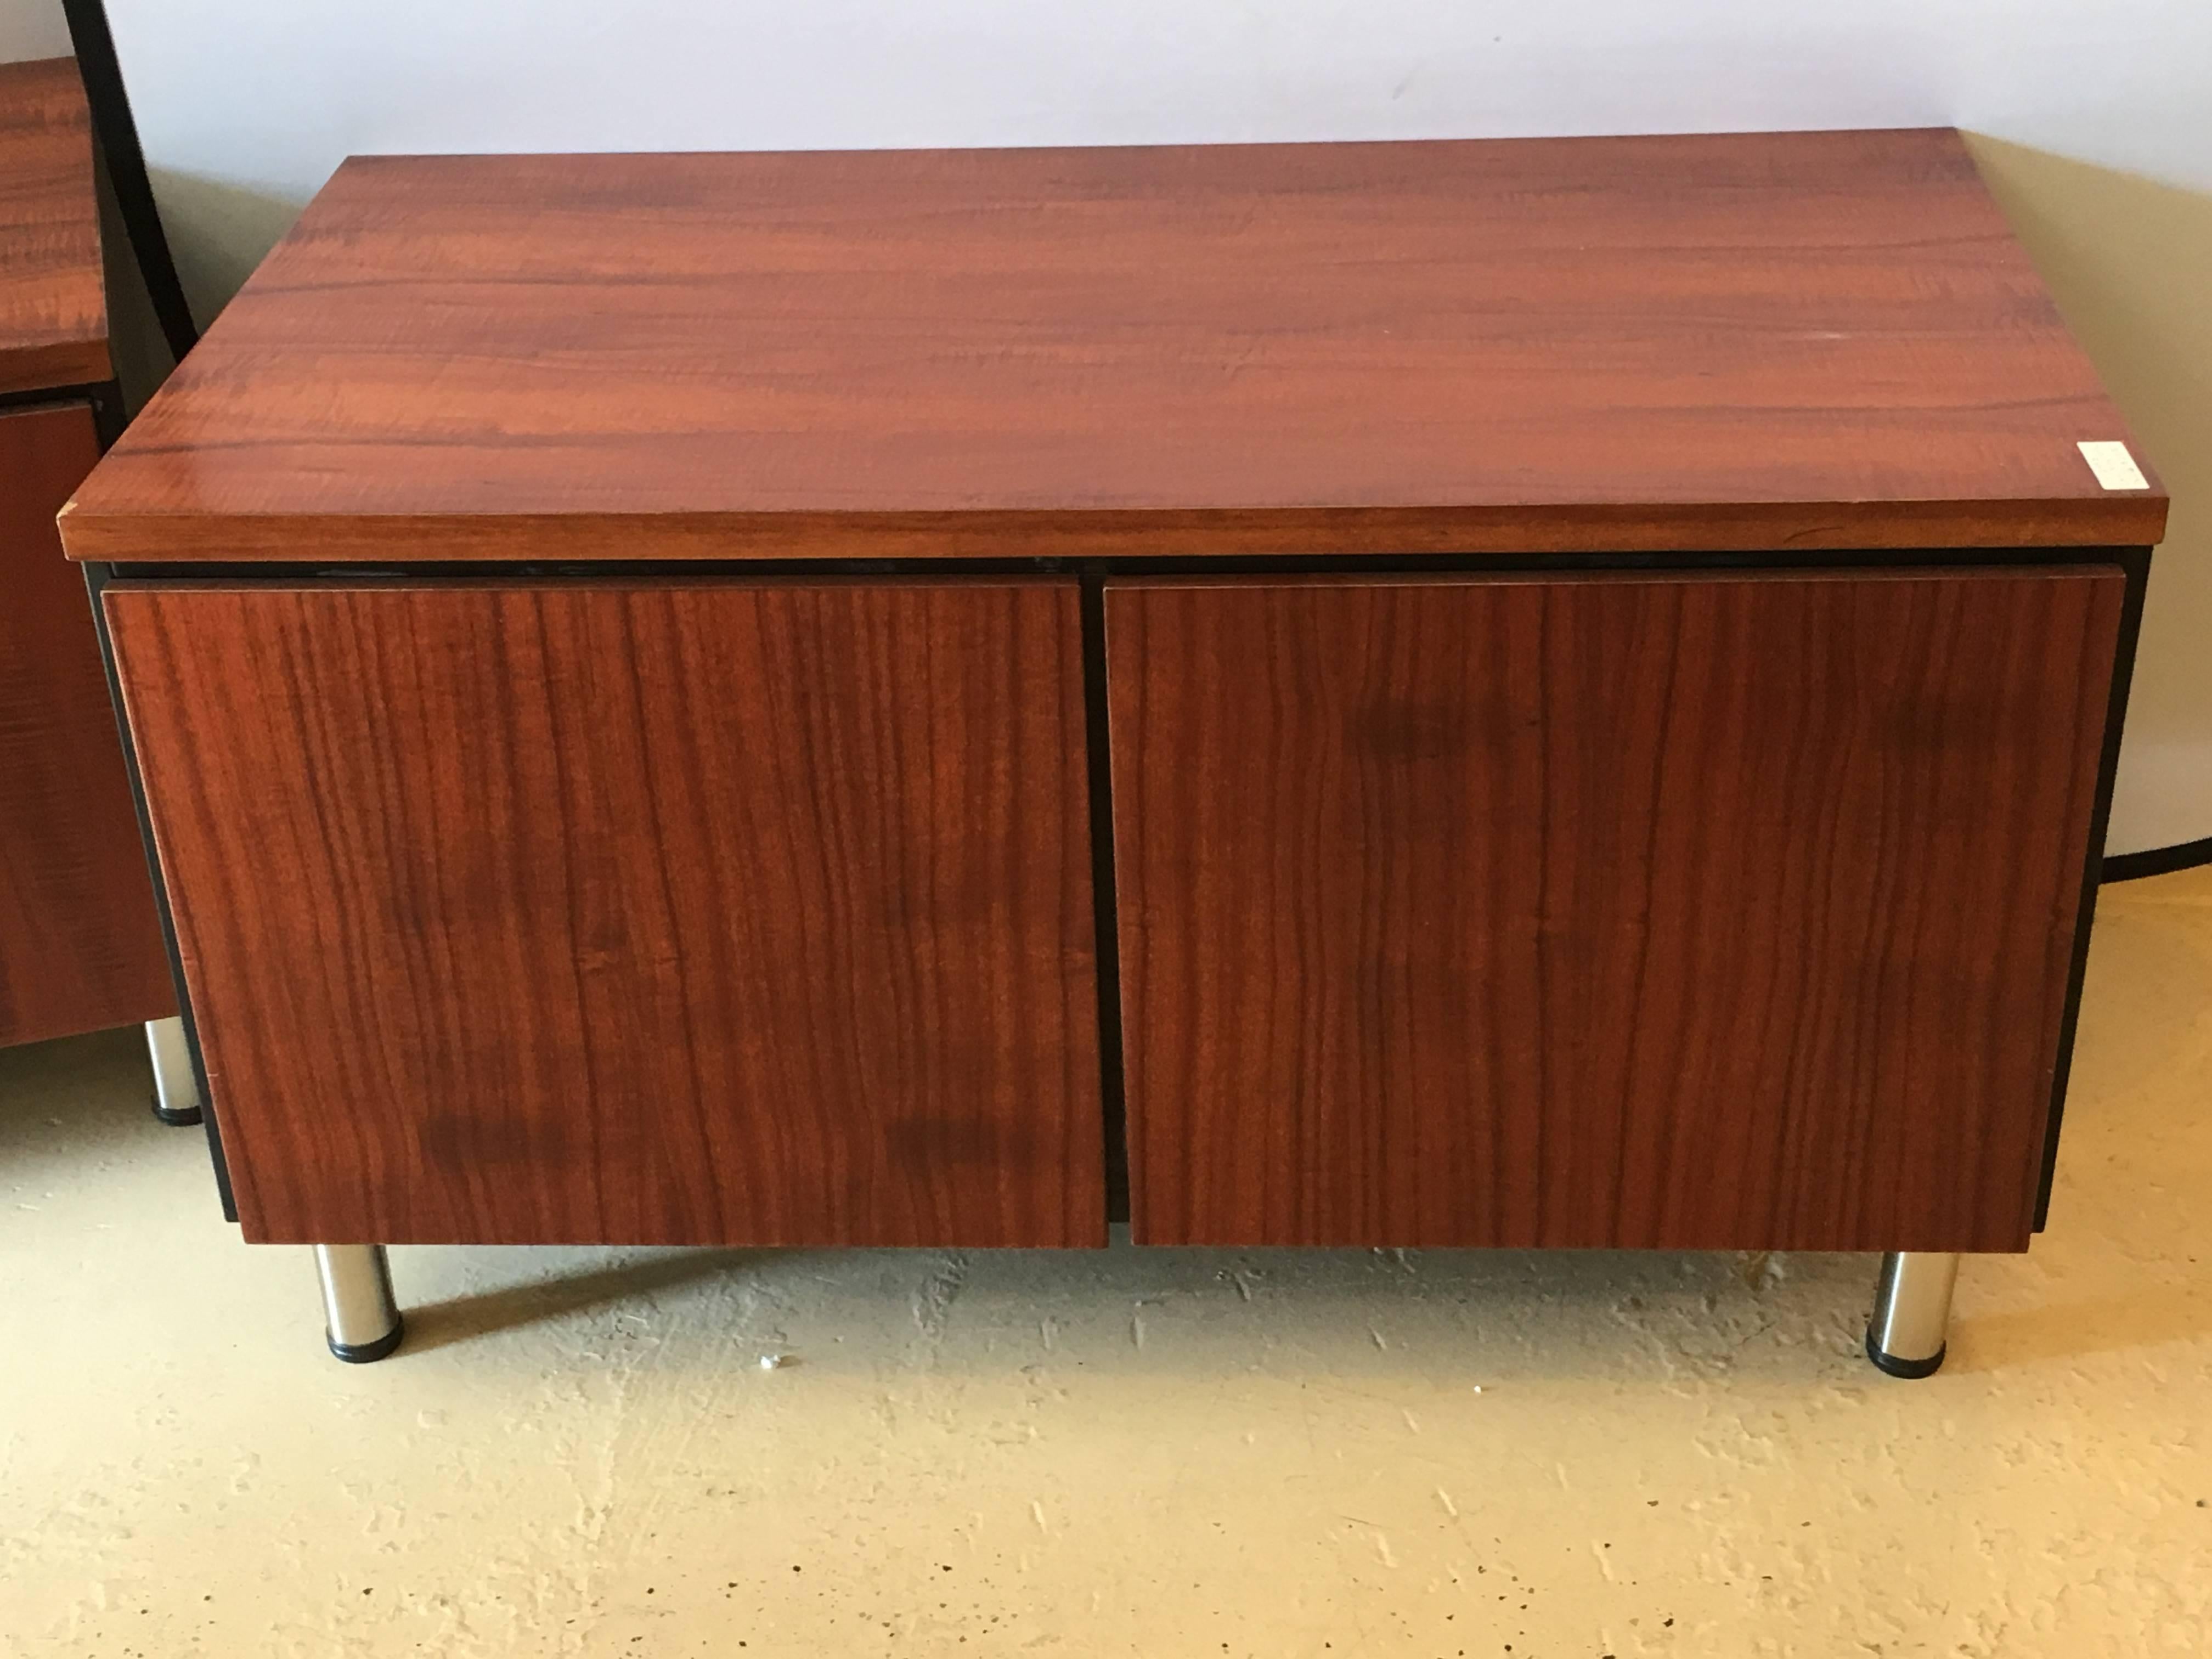 A pair of Mid-Century Modern rosewood with chrome feet chests. Adjustable shelf interior. The fronts having cylindrical chrome feet with black capped bottoms supporting two large door fronts leading to four open compartments of ebony wood. Each